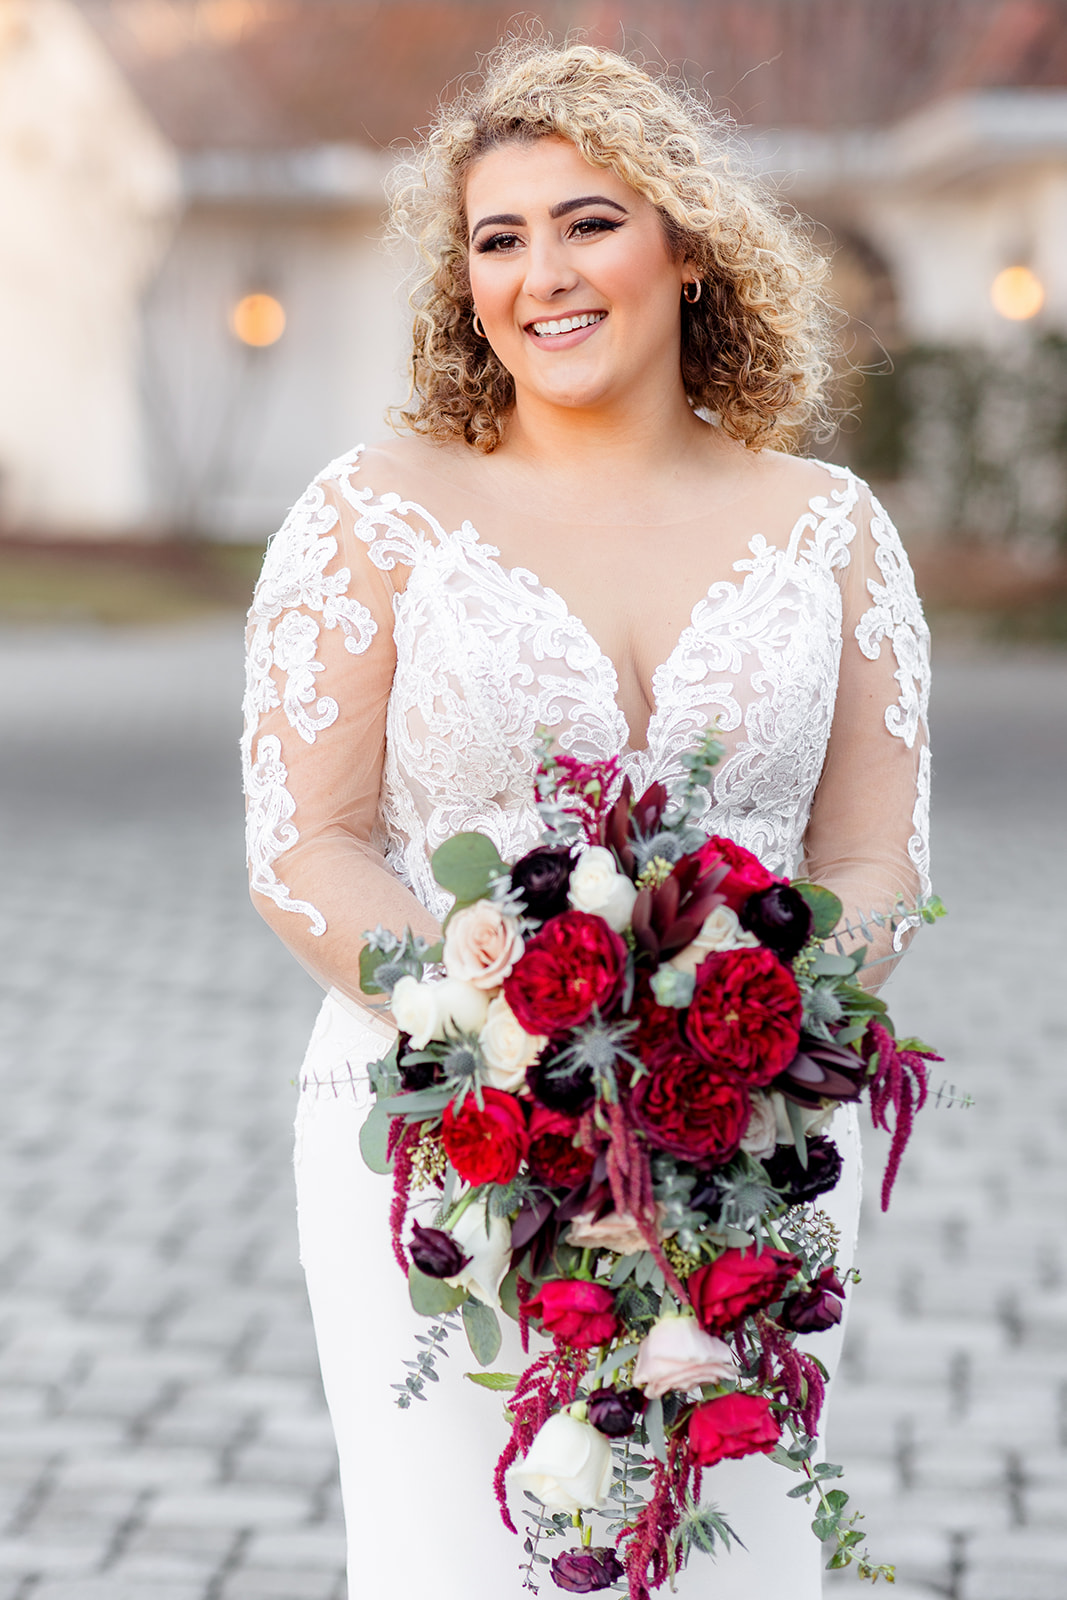 A bride smiles while standing in her lace dress holding her red bouquet on a paved driveway at sunset